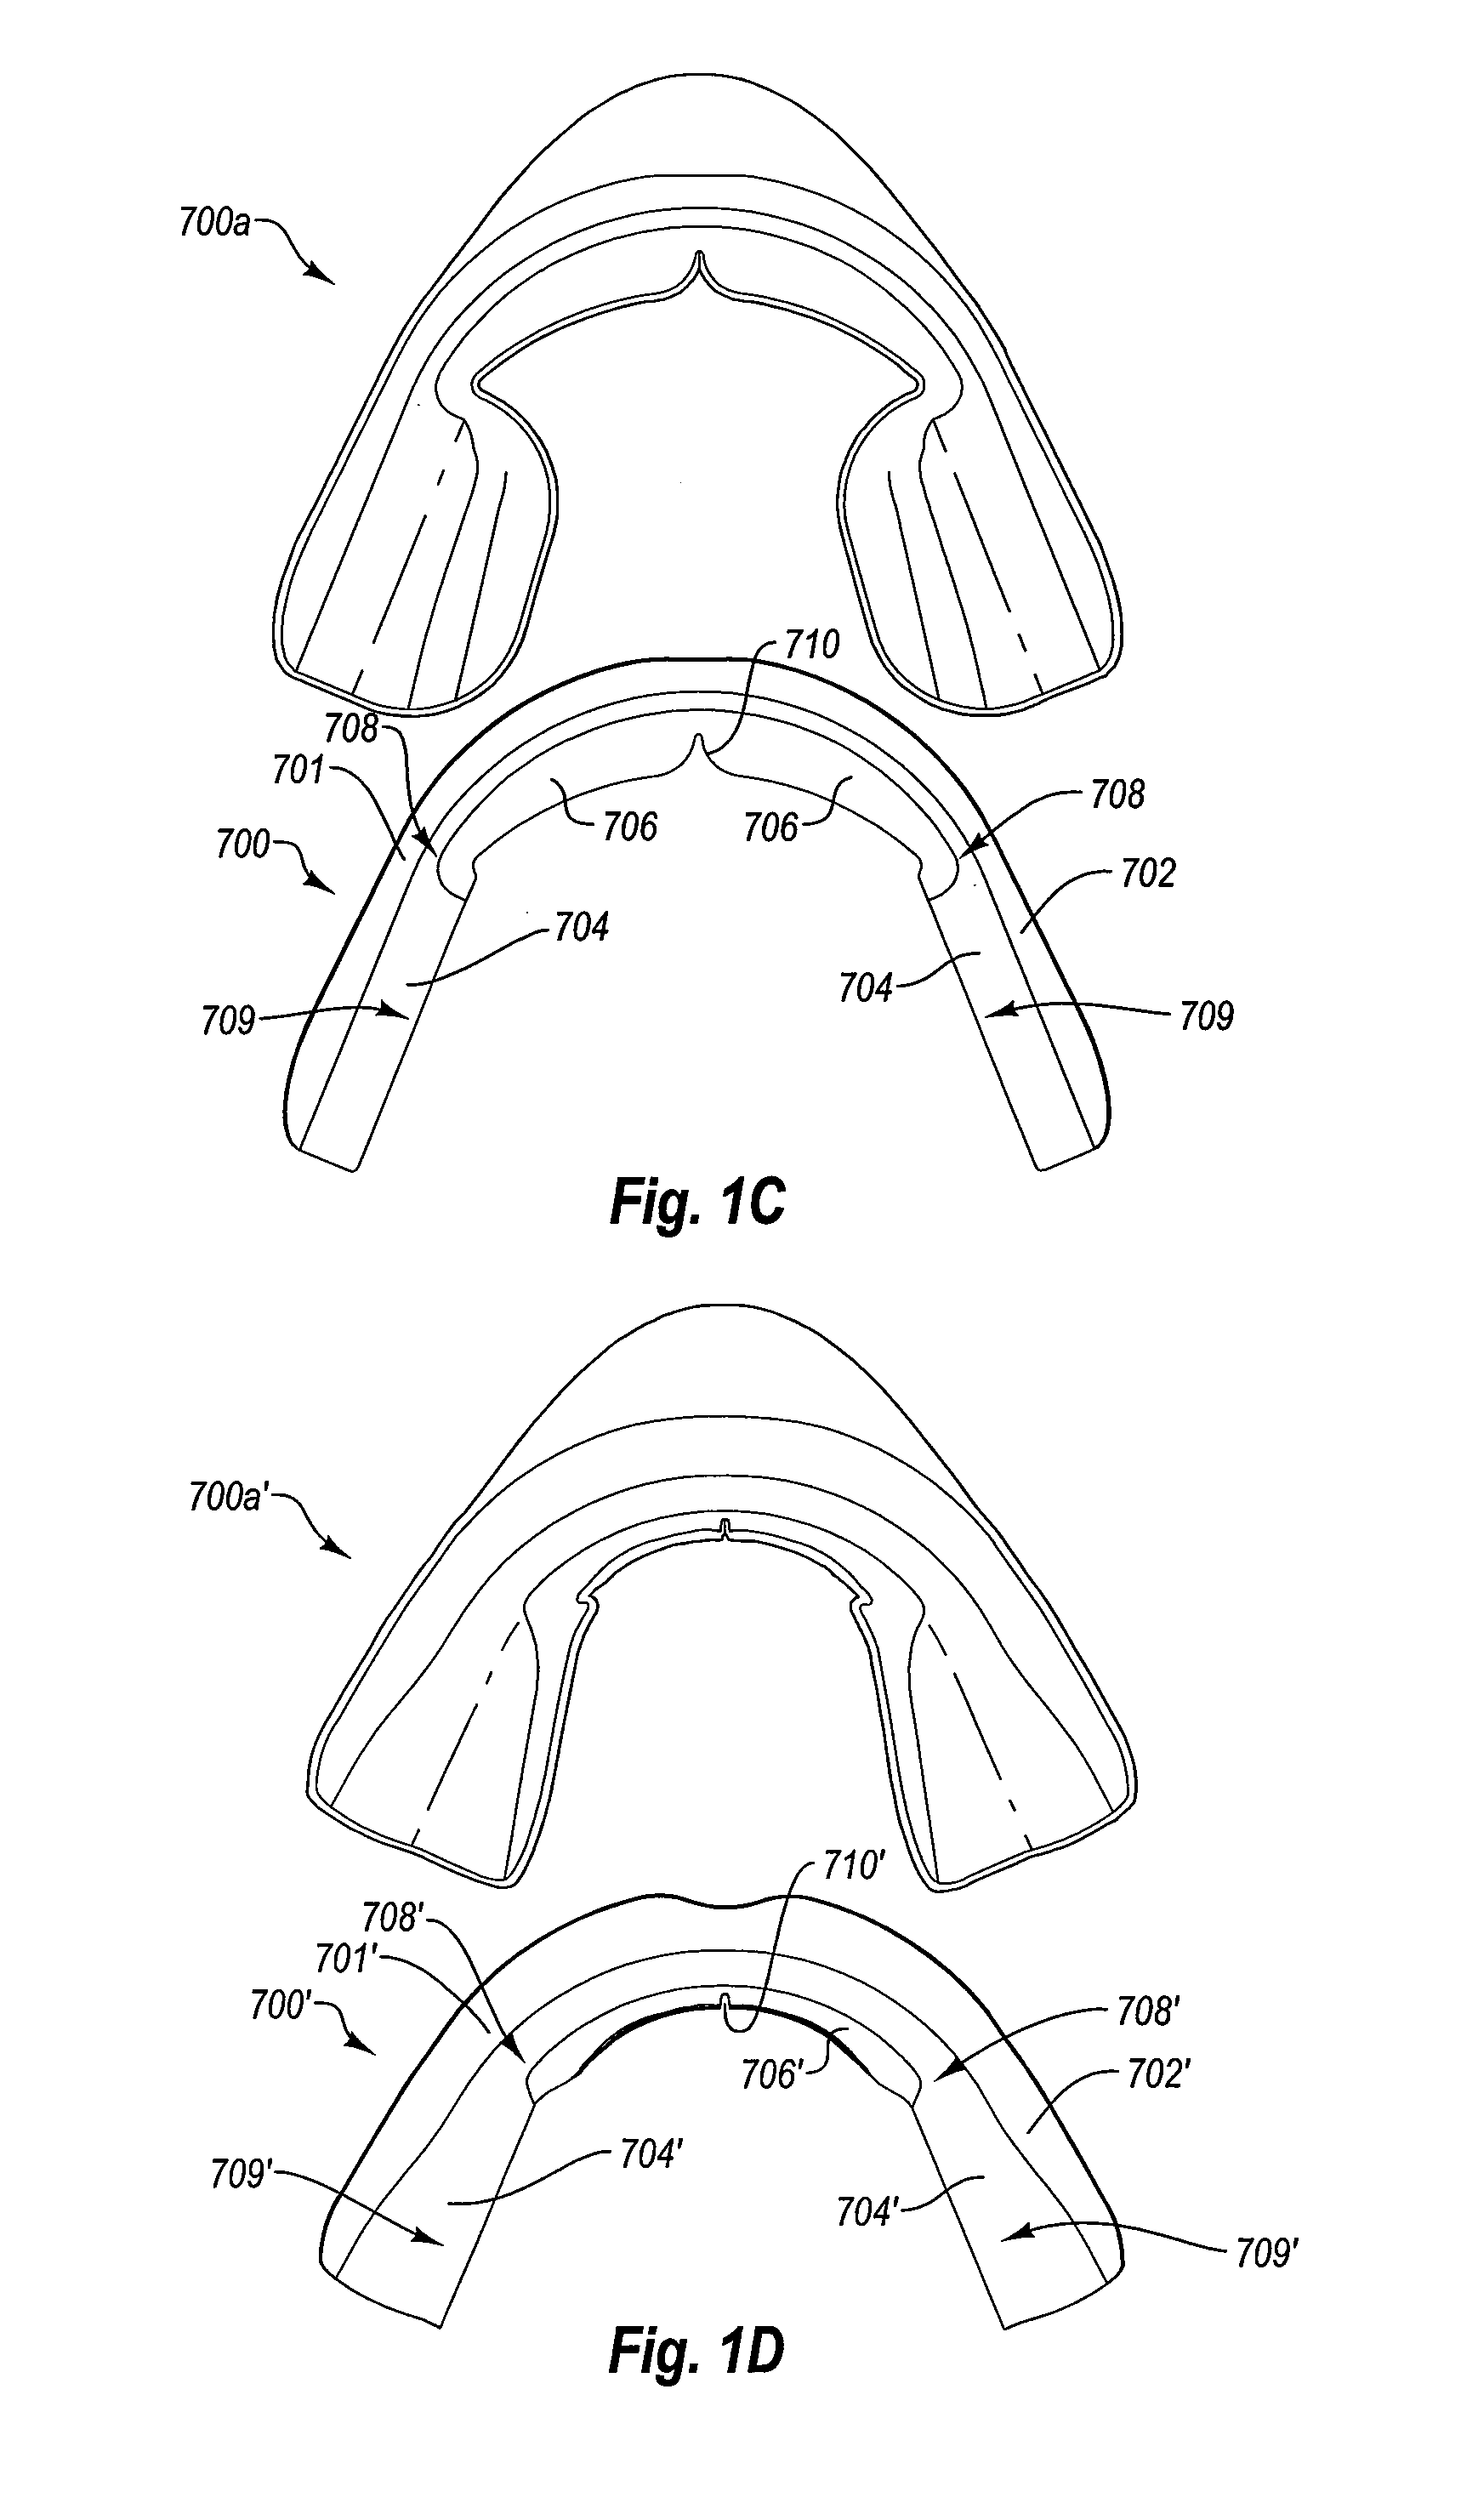 Non-custom dental treatment trays and mouth guards having improved anatomical features